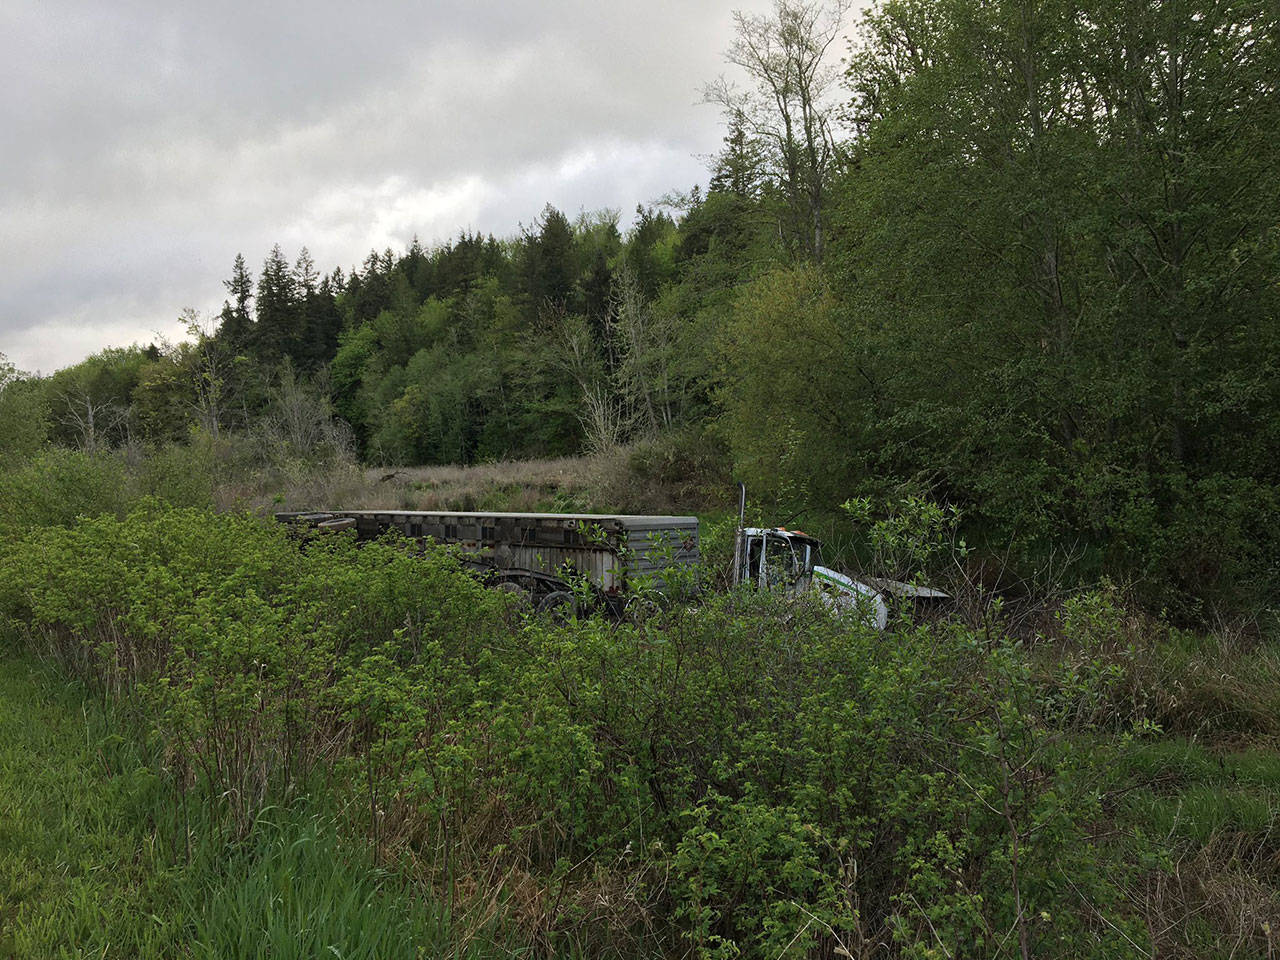 A semi carrying propane tanks flipped over at Leland Cutoff Road in Quilcene at approximately 8 a.m. Wednesday, May 6, 2020. (Washington State Trooper Chelsea Hodgson)